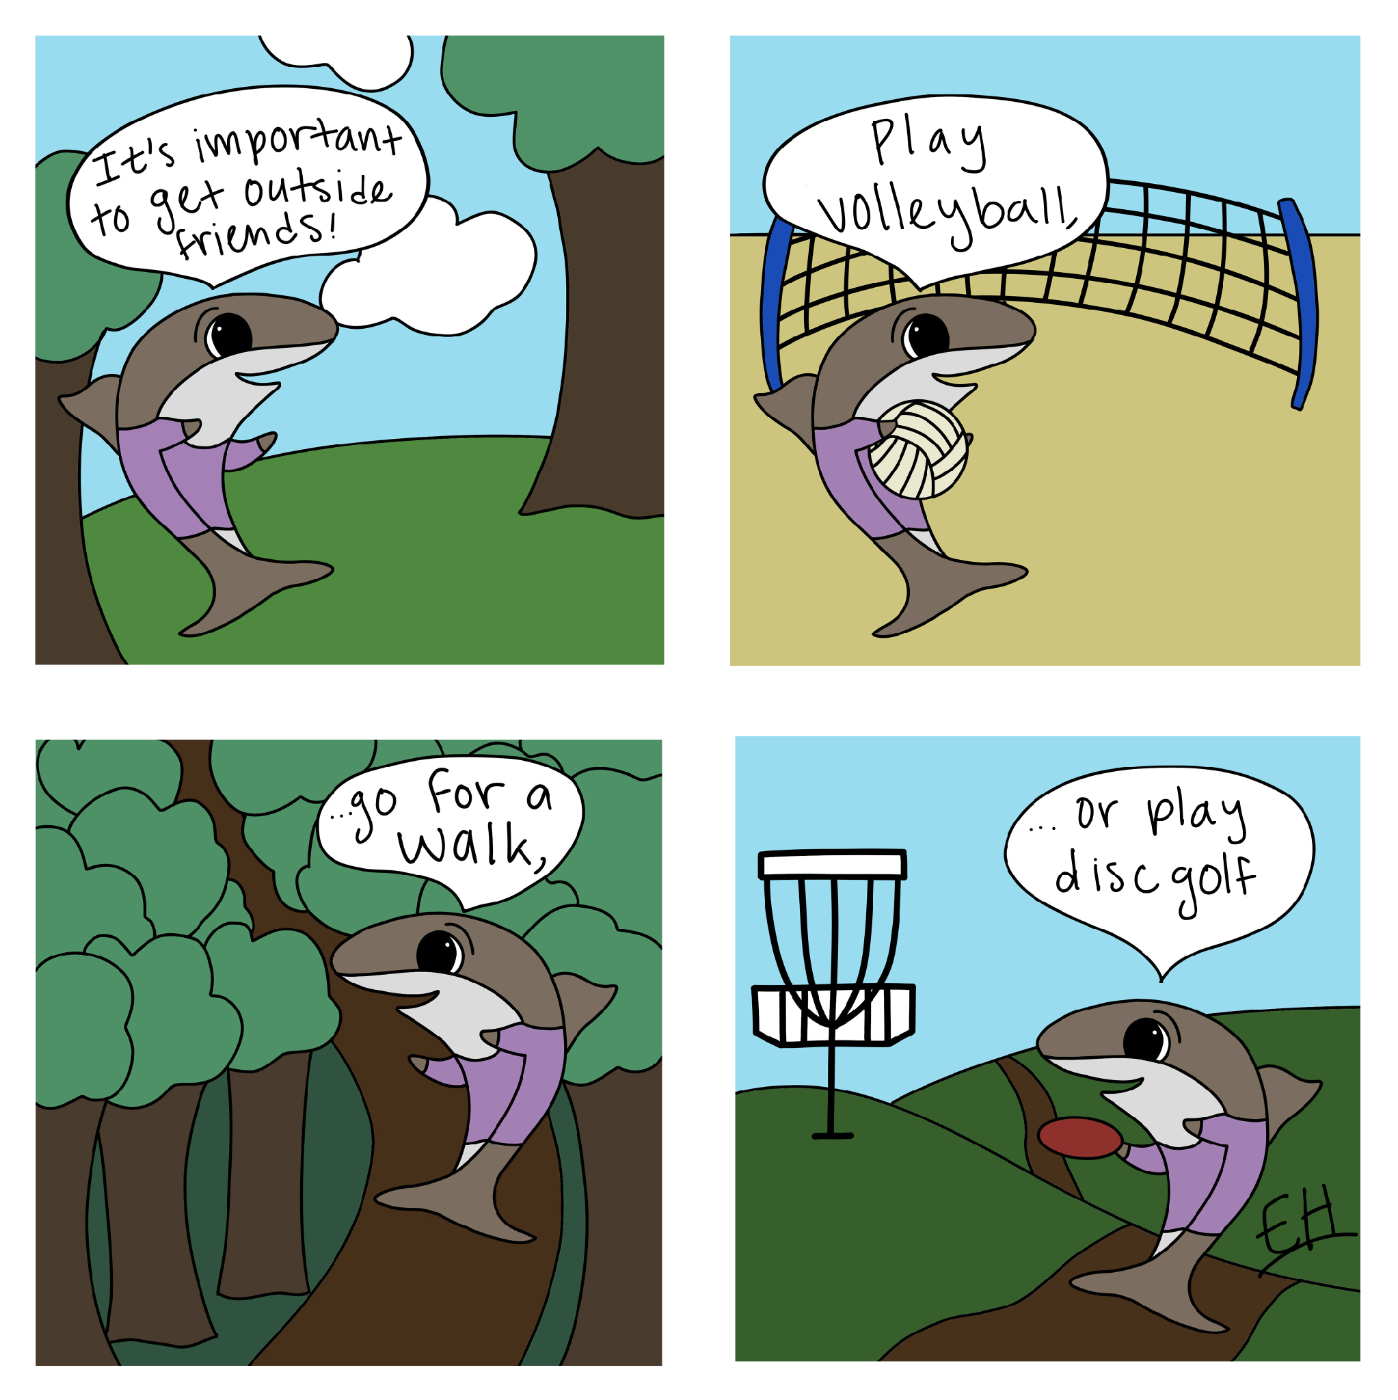 Comic of Lawrence the shark standing outside in front of trees. Lawrence says “It's important to get outside friends!” He is then seen on a sand volleyball court holding a volleyball. He says, “Play some volleyball!” Then Lawrence is seen walking on a trail through the woods. “Go for a walk,” he says. Finally, he is seen on a disc golf course holding a disc. He says, “or play some disc golf!”